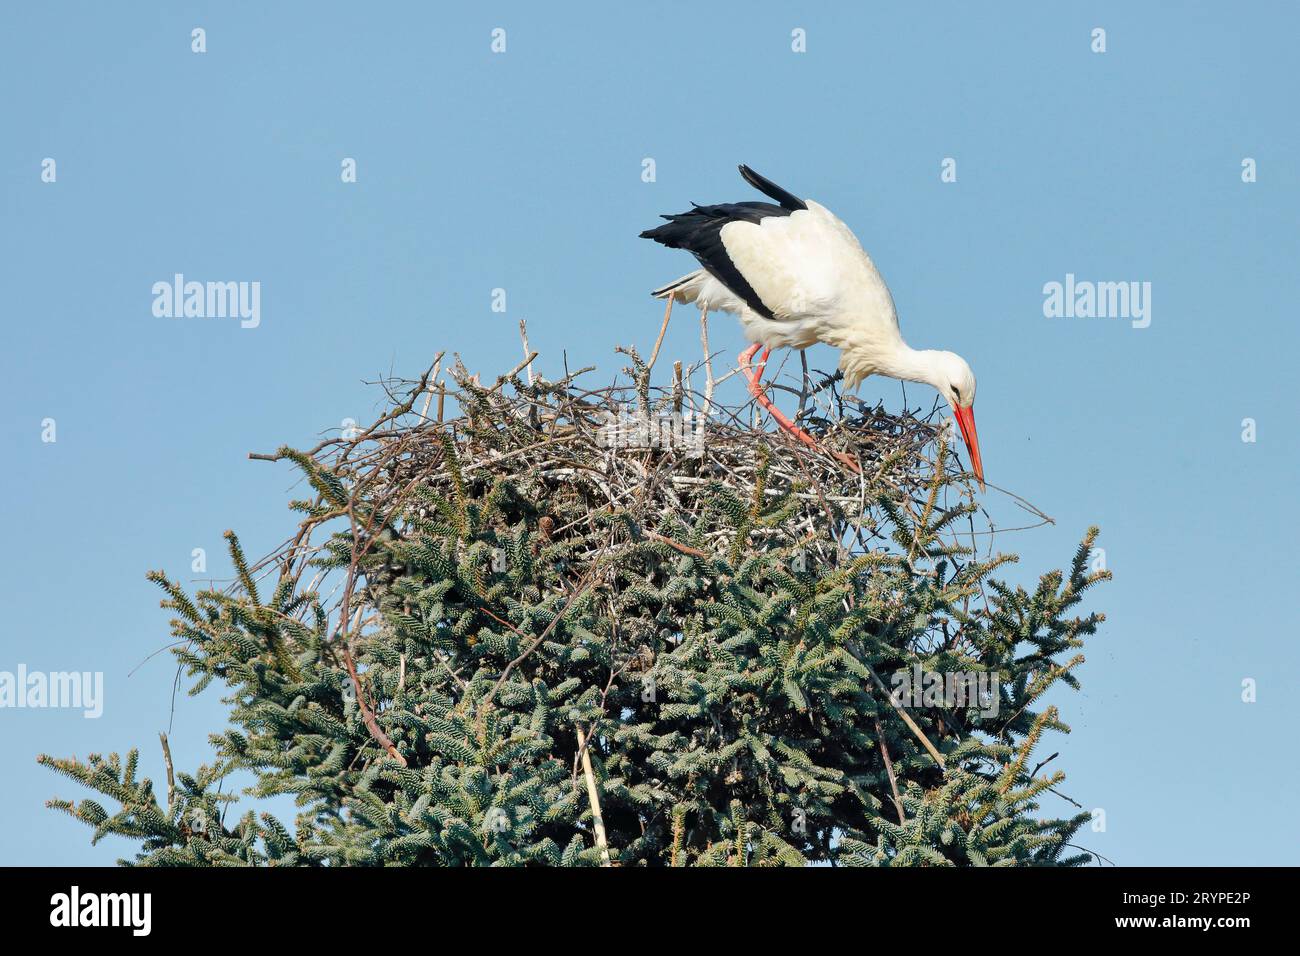 A White Stork (Ciconia ciconis) building a nest in a tree canopy under a blue sky. Switzerland Stock Photo